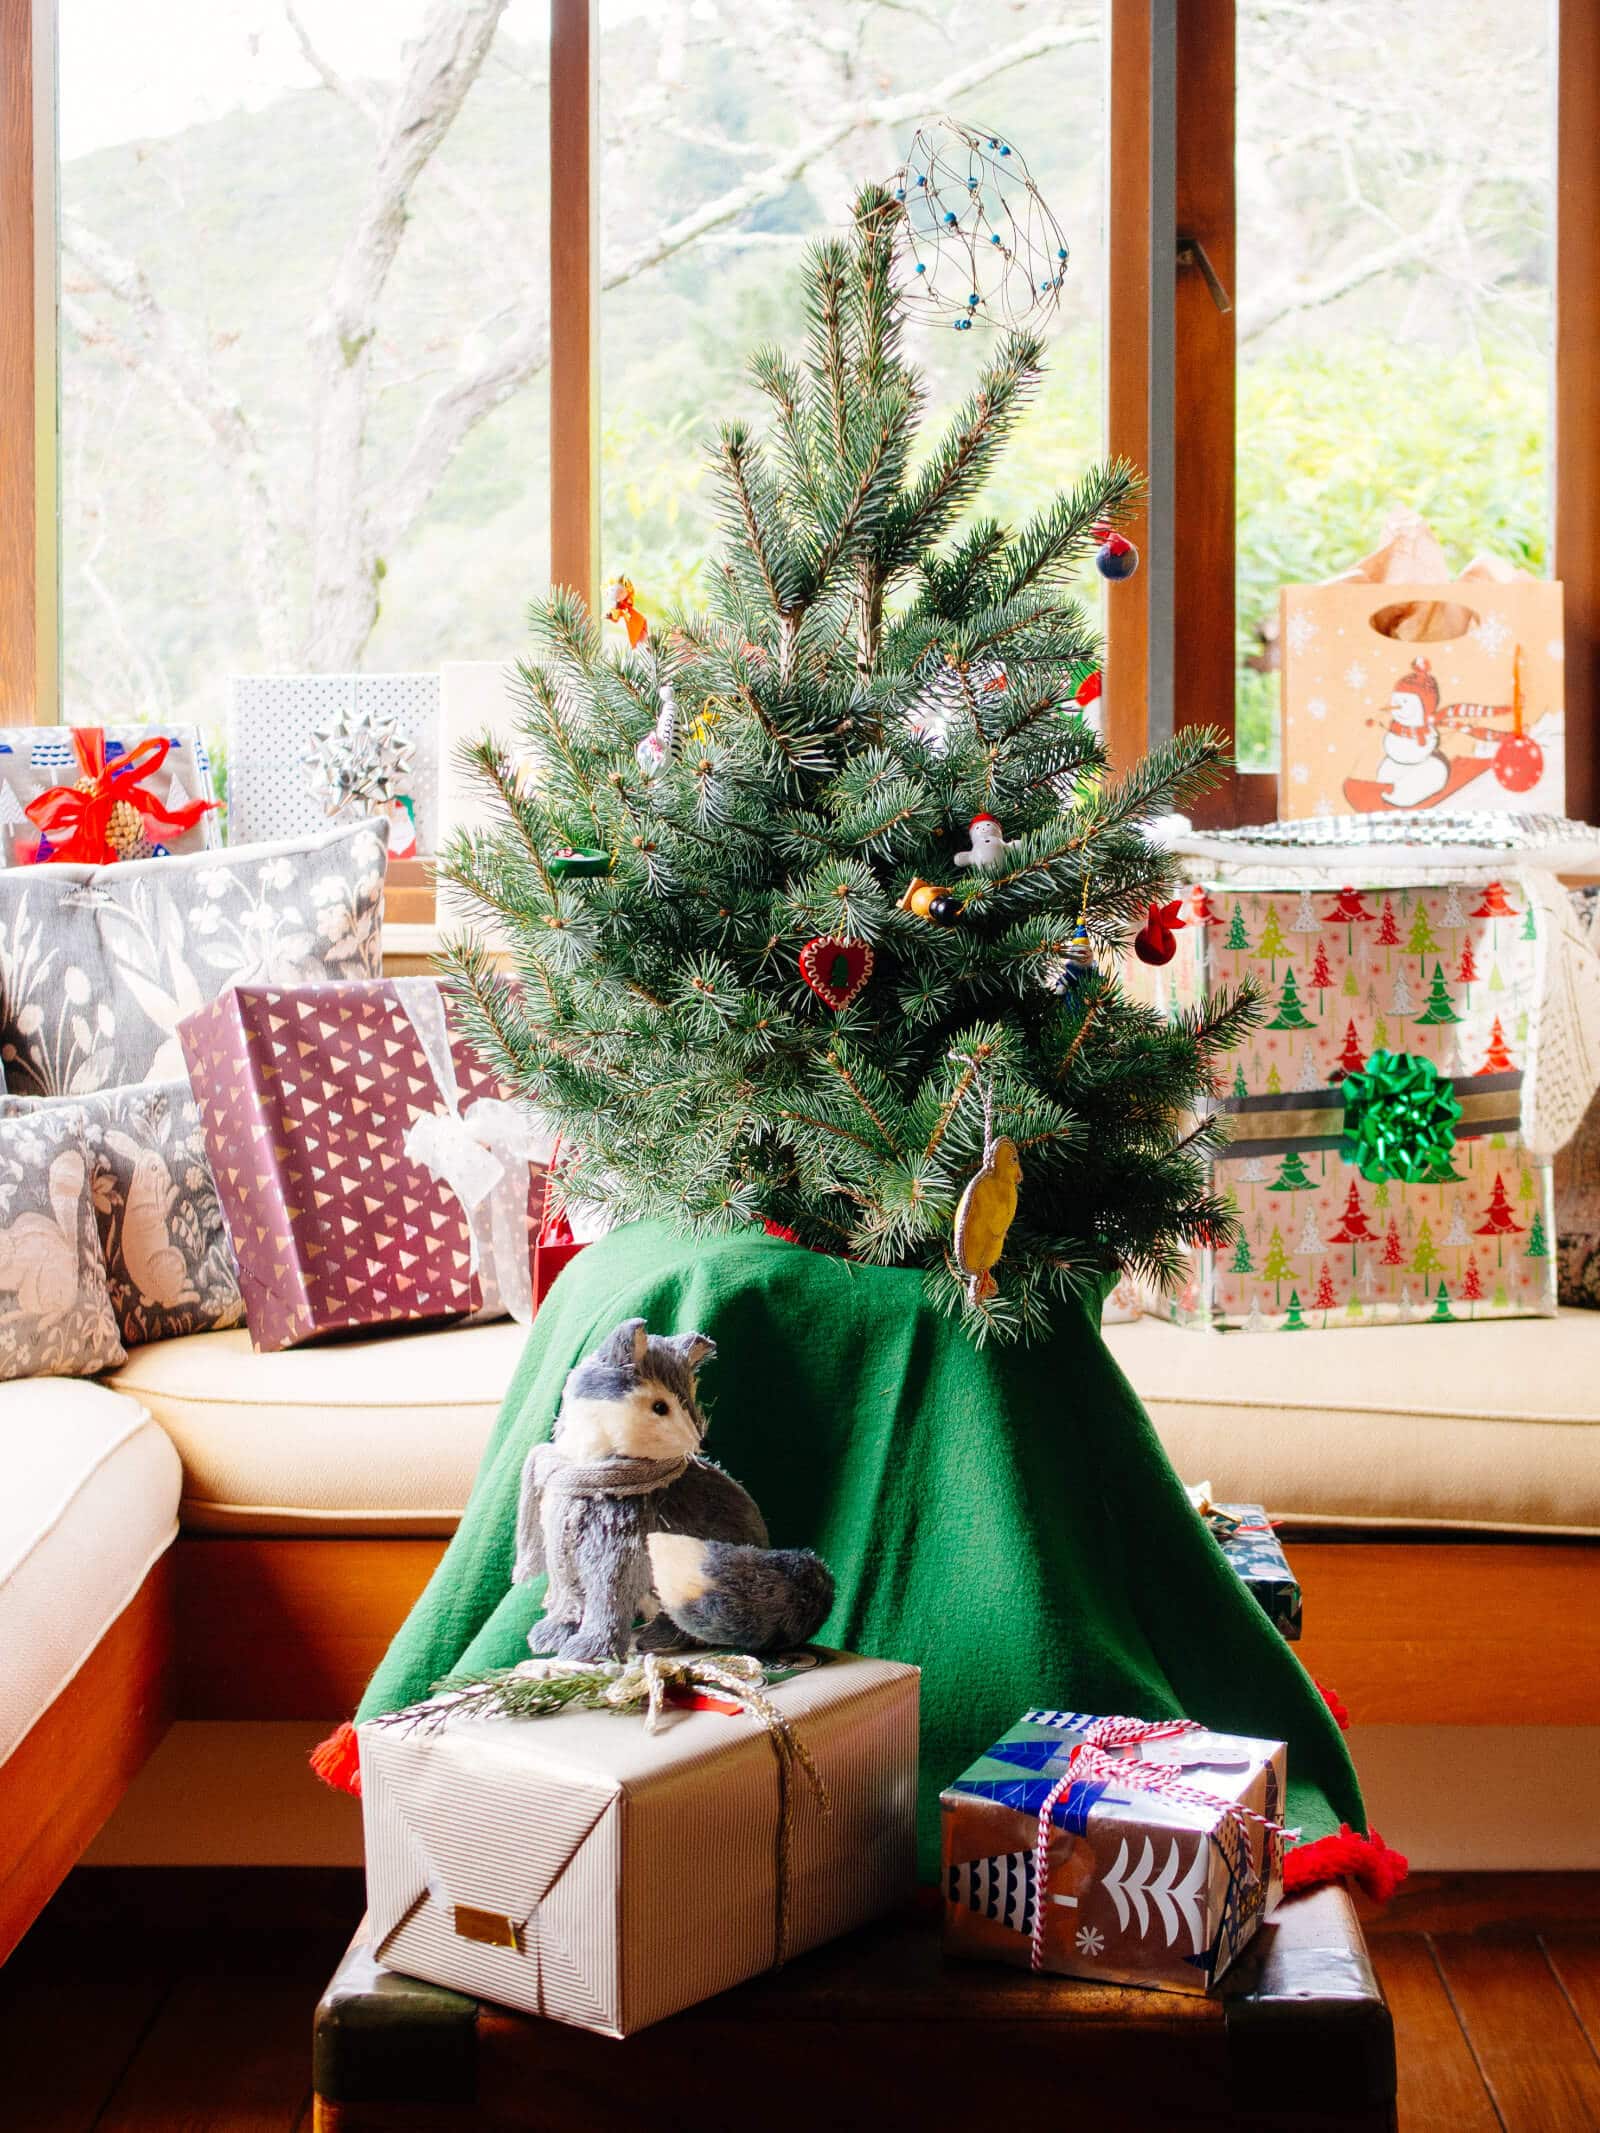 Place your Christmas tree away from heat sources